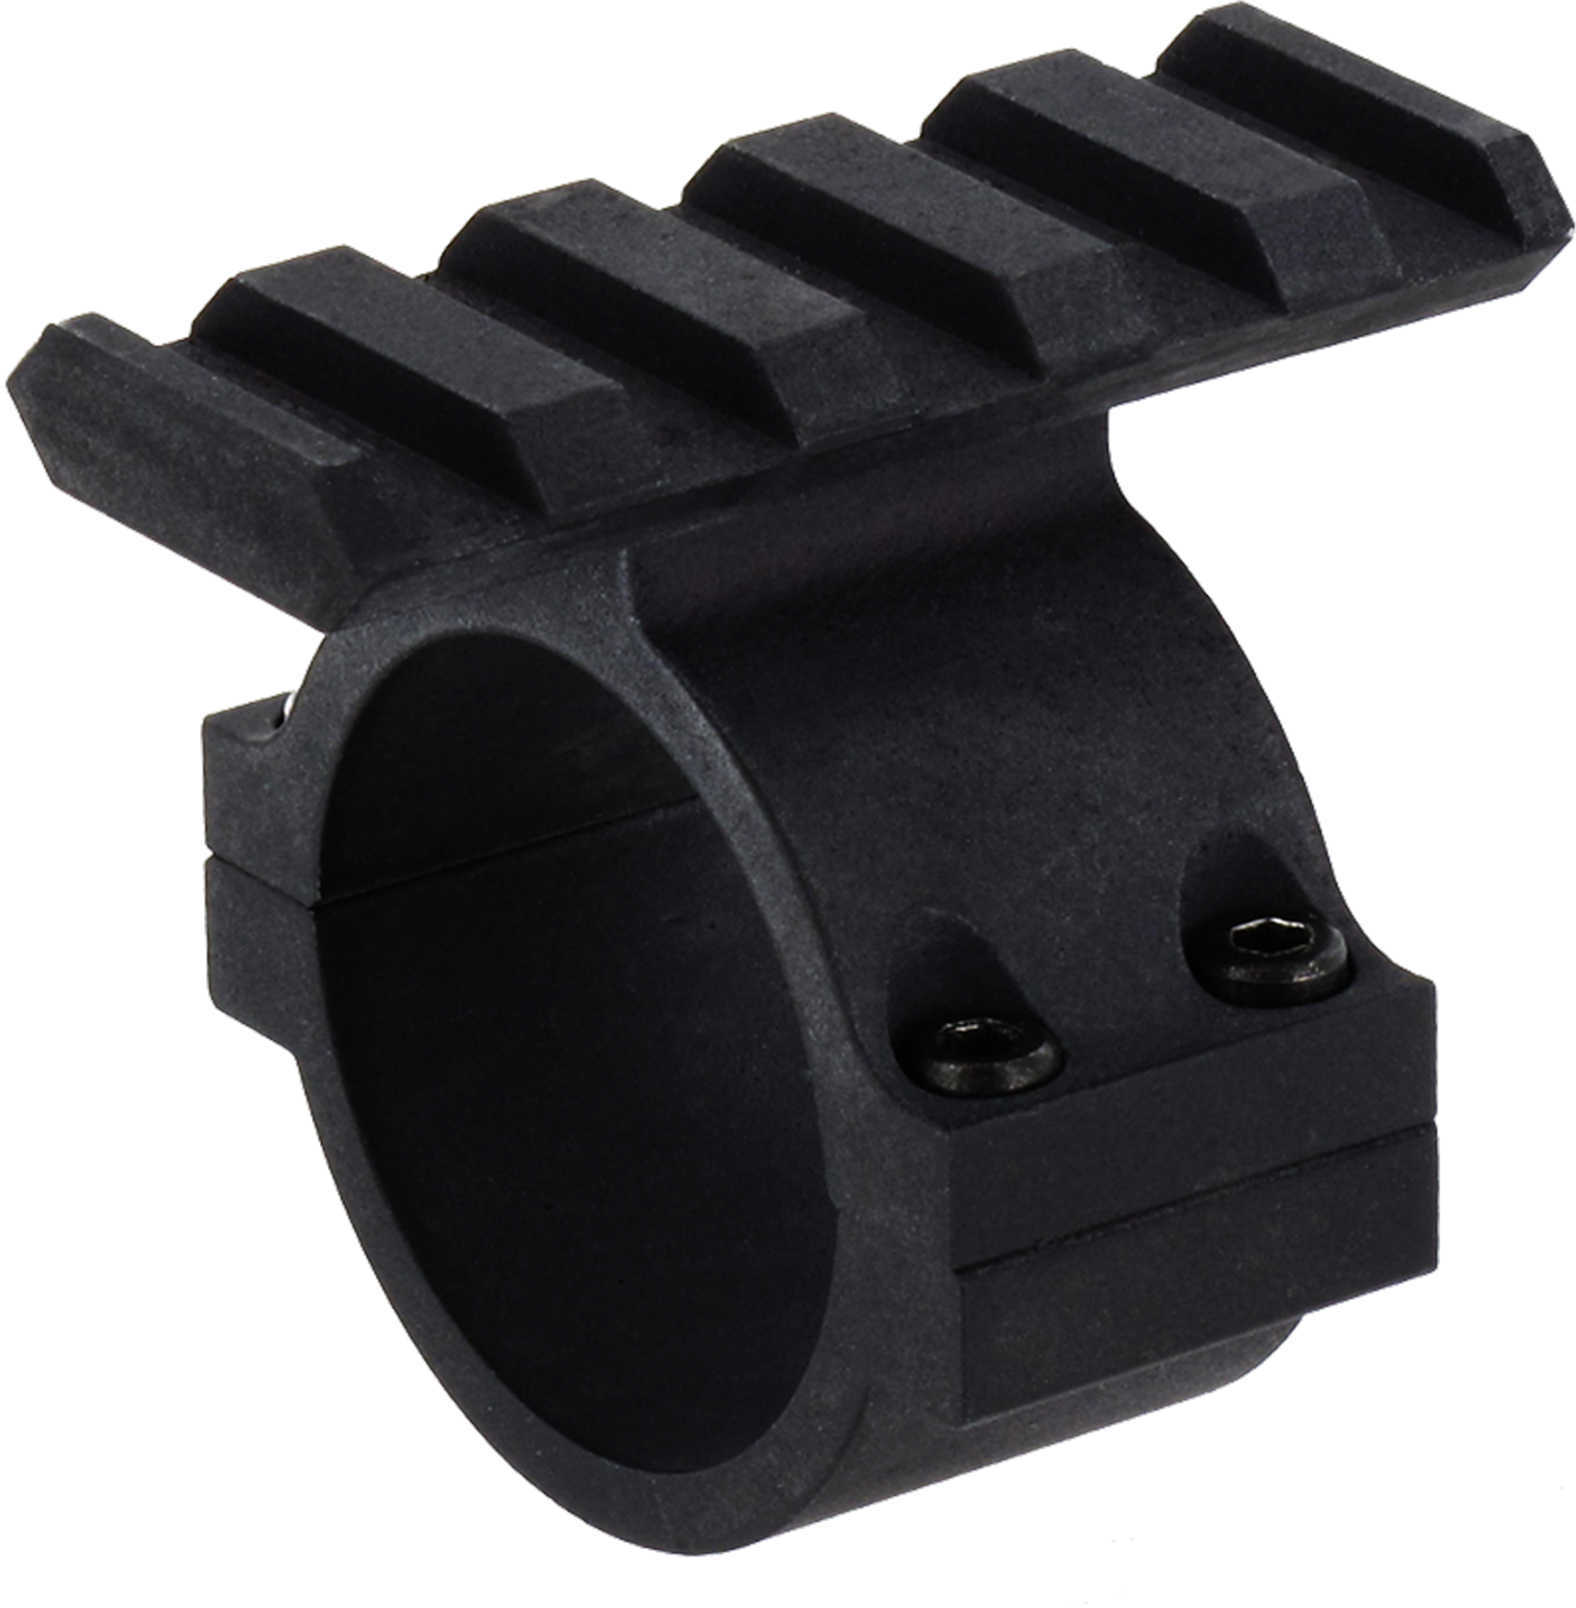 Aimpoint Sniper Quickfire 30mm Scope Tube Mount Md: 200152